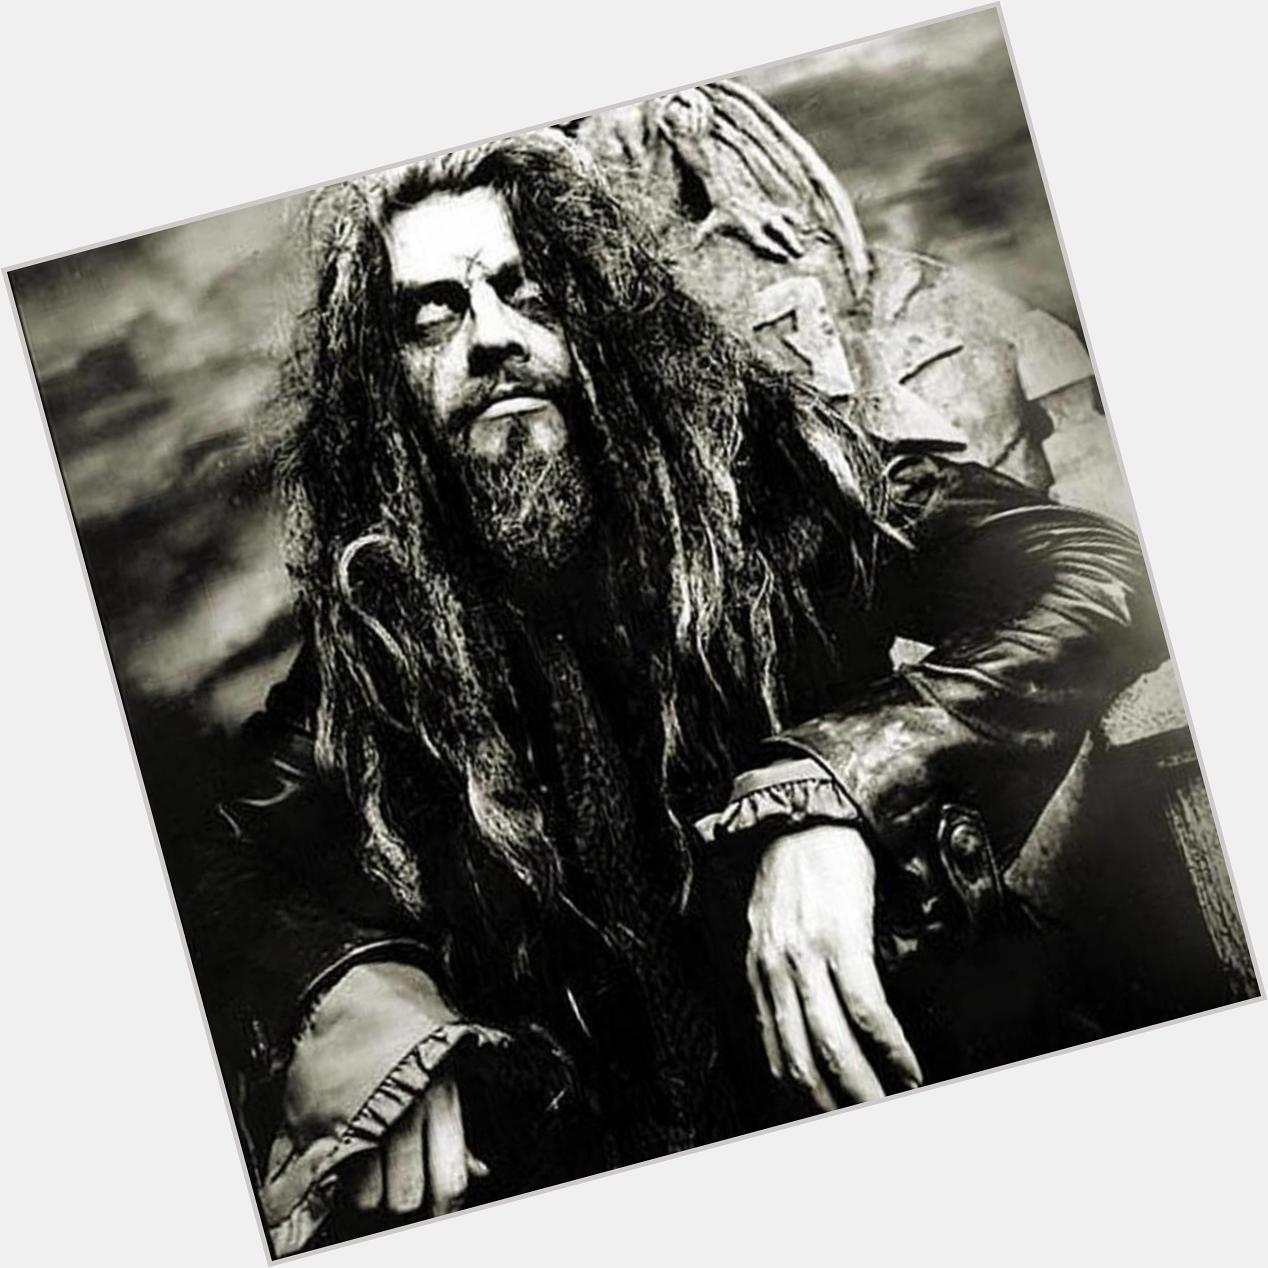 Let us not forget the great Rob Zombie. Happy 50th birthday you sexy freak! 